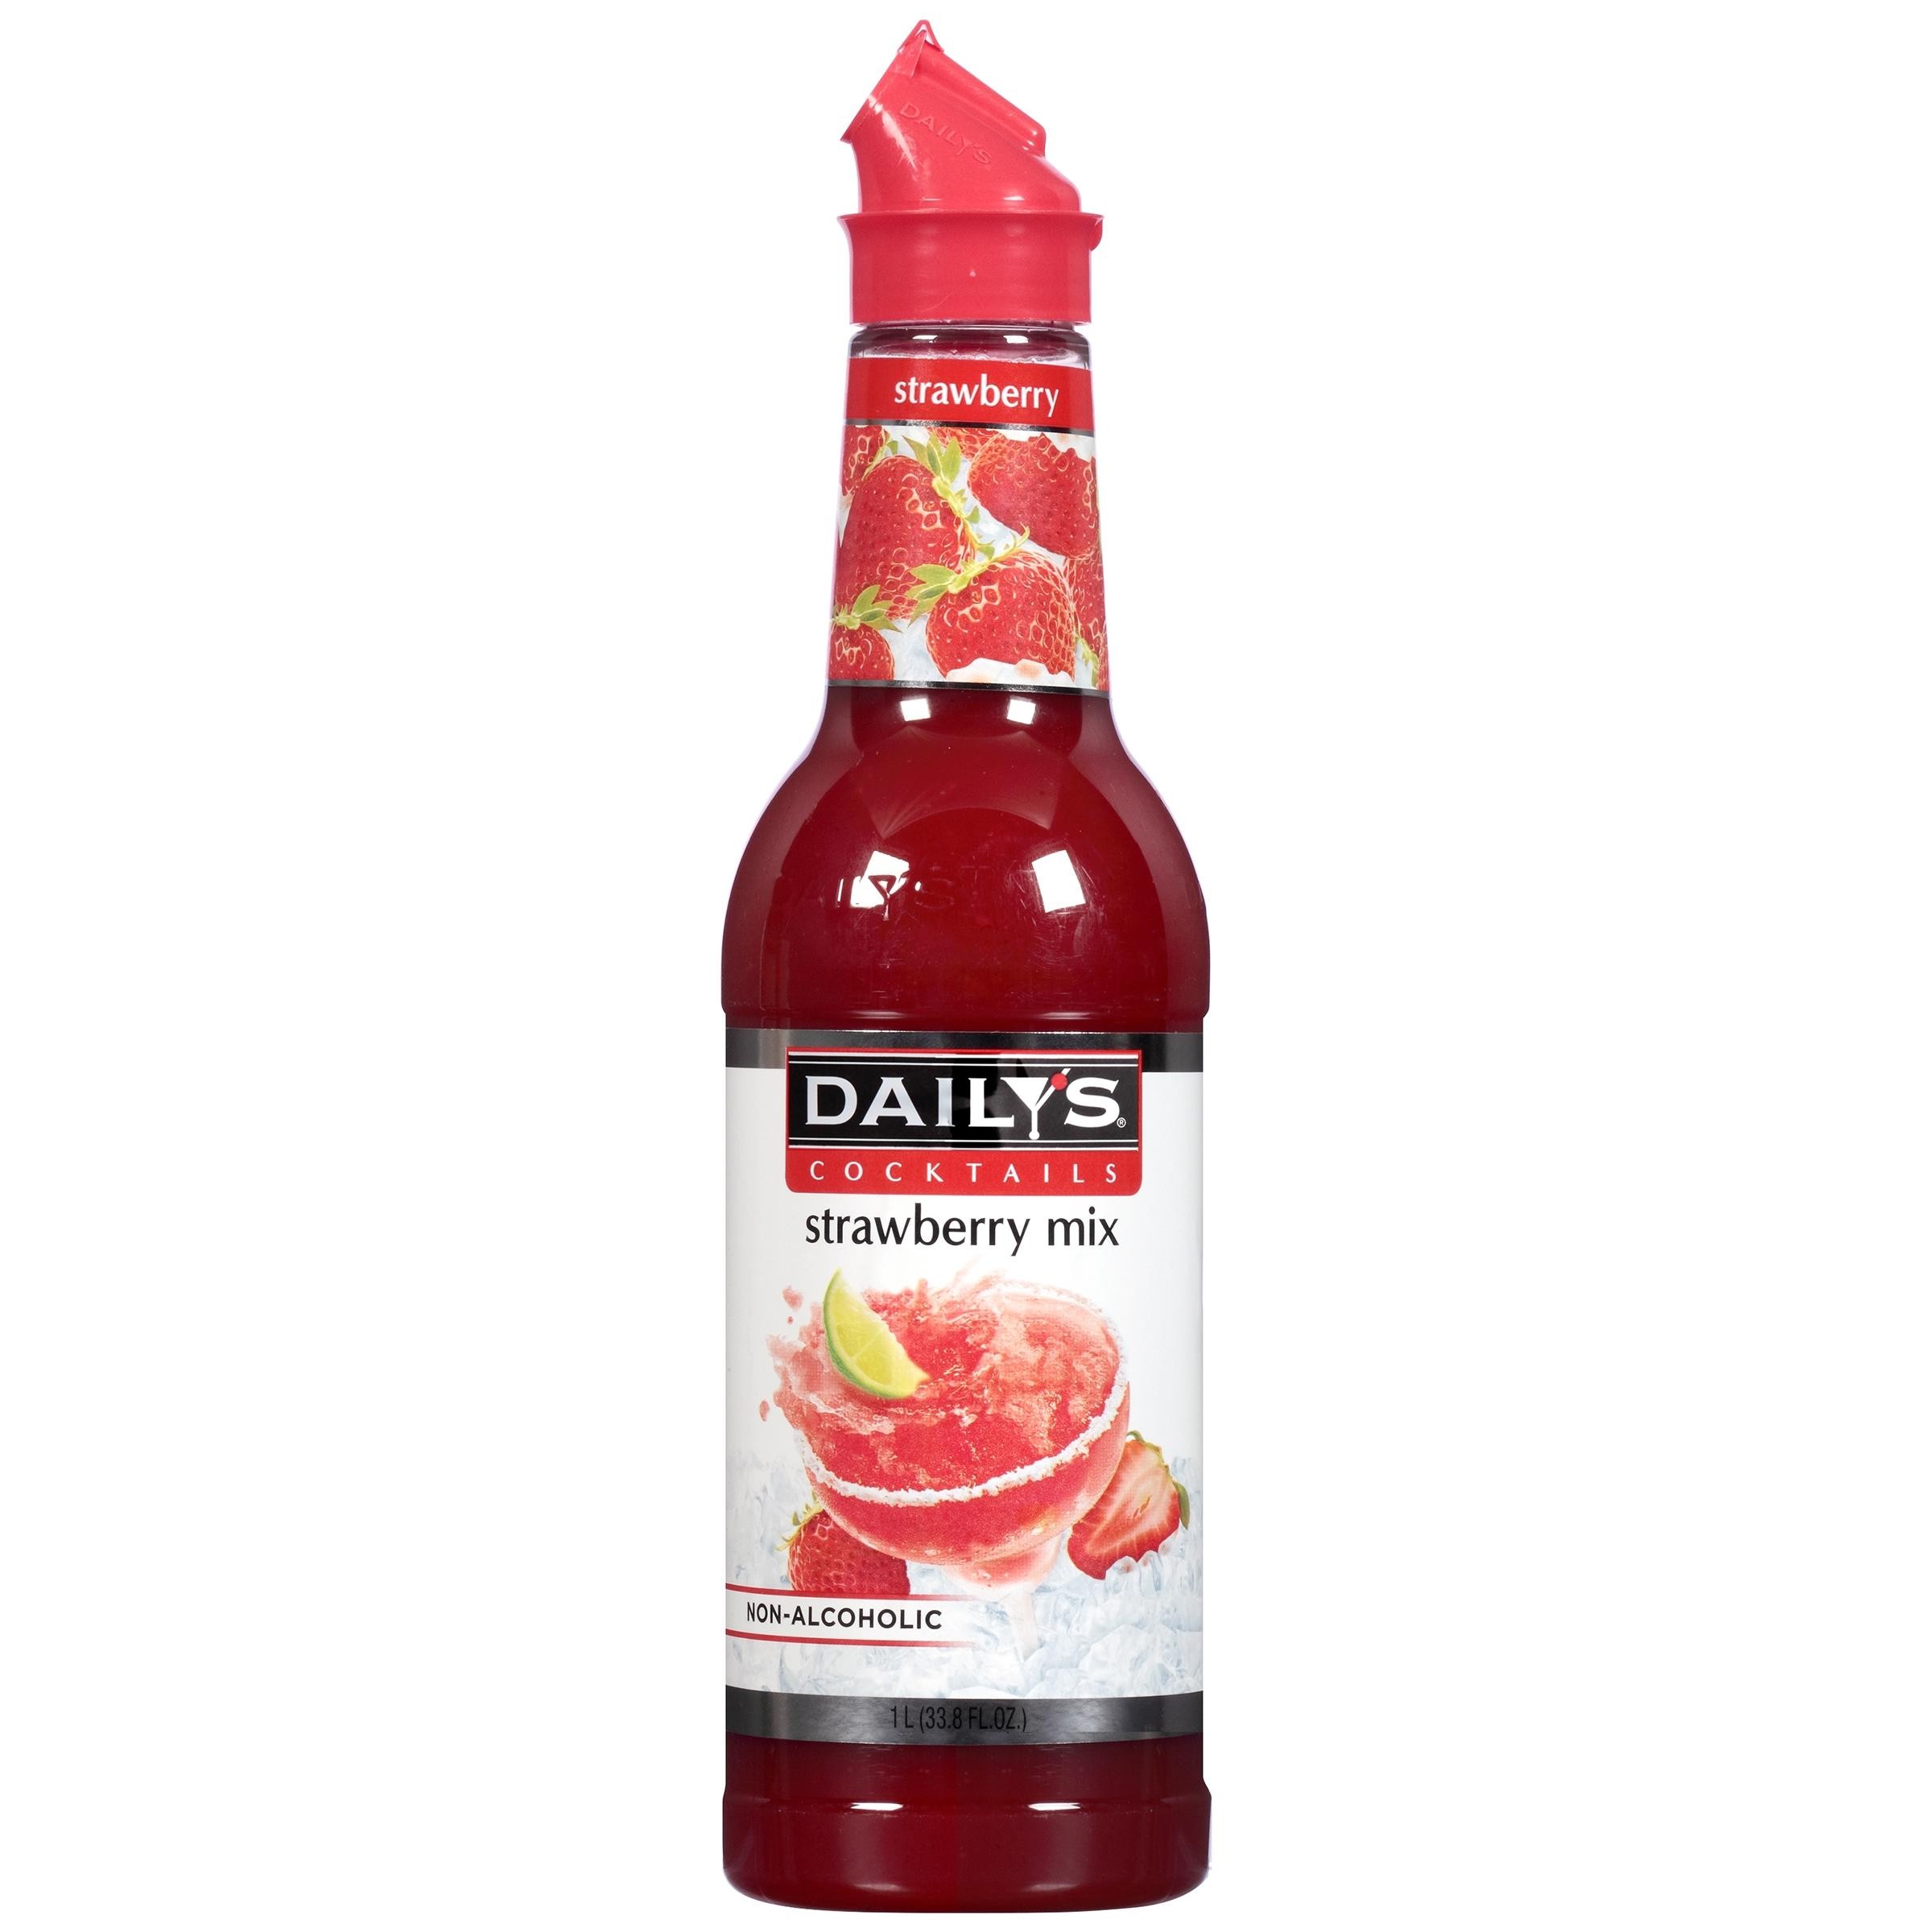 Daily's Cocktails Strawberry Non-Alcoholic Cocktail Mix, 33.8 Fl Oz Bottle